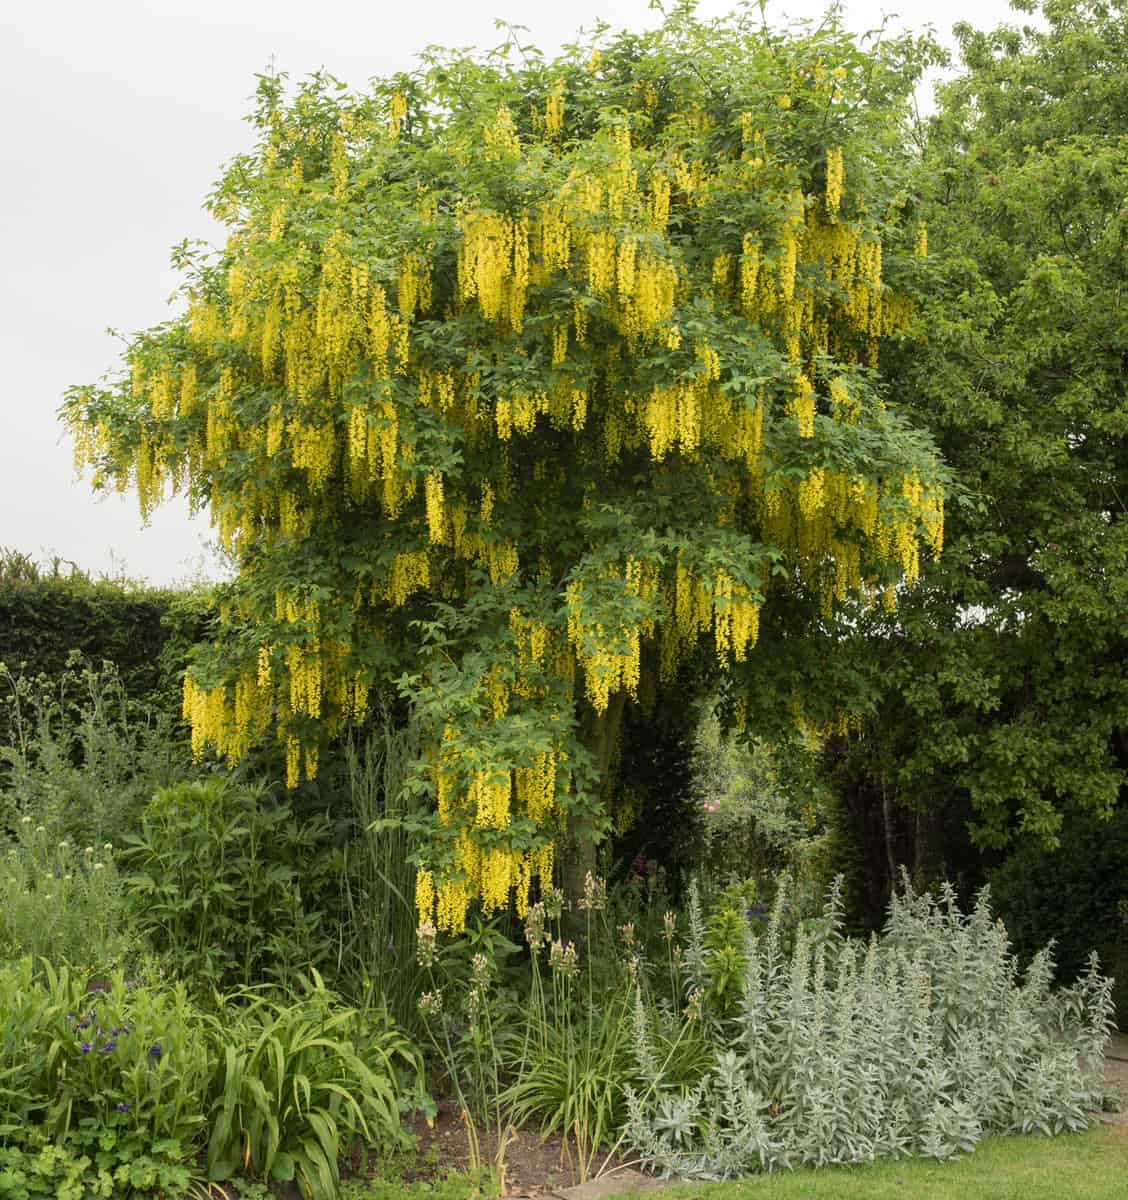 Yellow Flowering Labernum Tree (Golden Chain) in a Country Cottage Garden in the Rural Village of Tintinhull, Somerset, England, UK